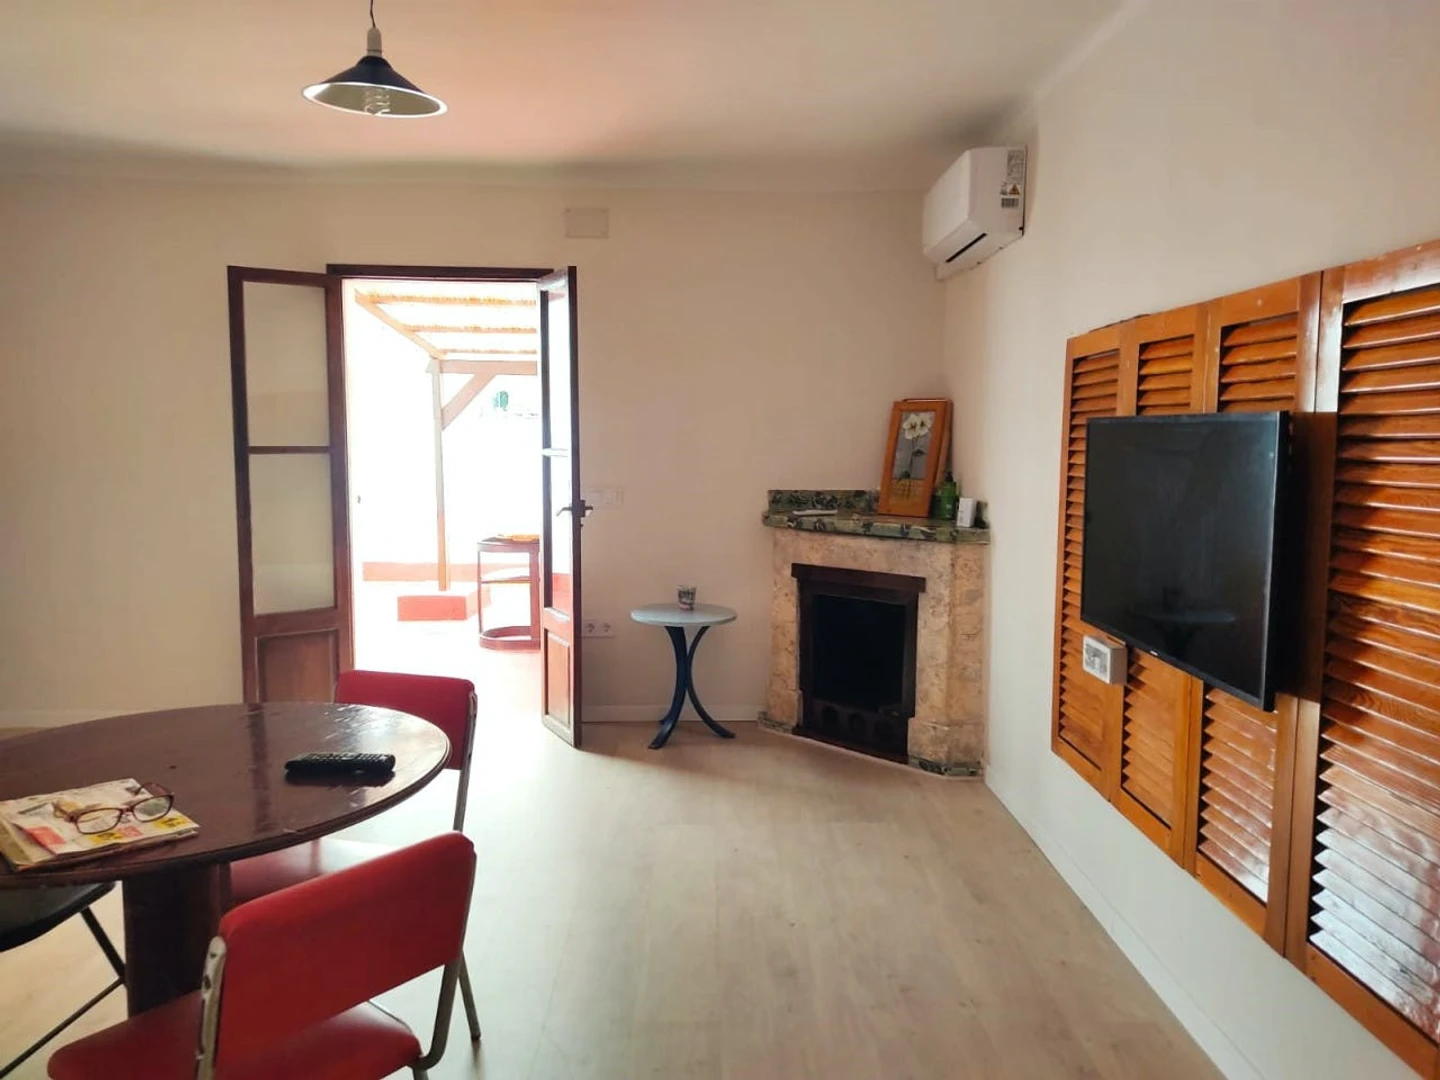 Renting rooms by the month in Palma De Mallorca